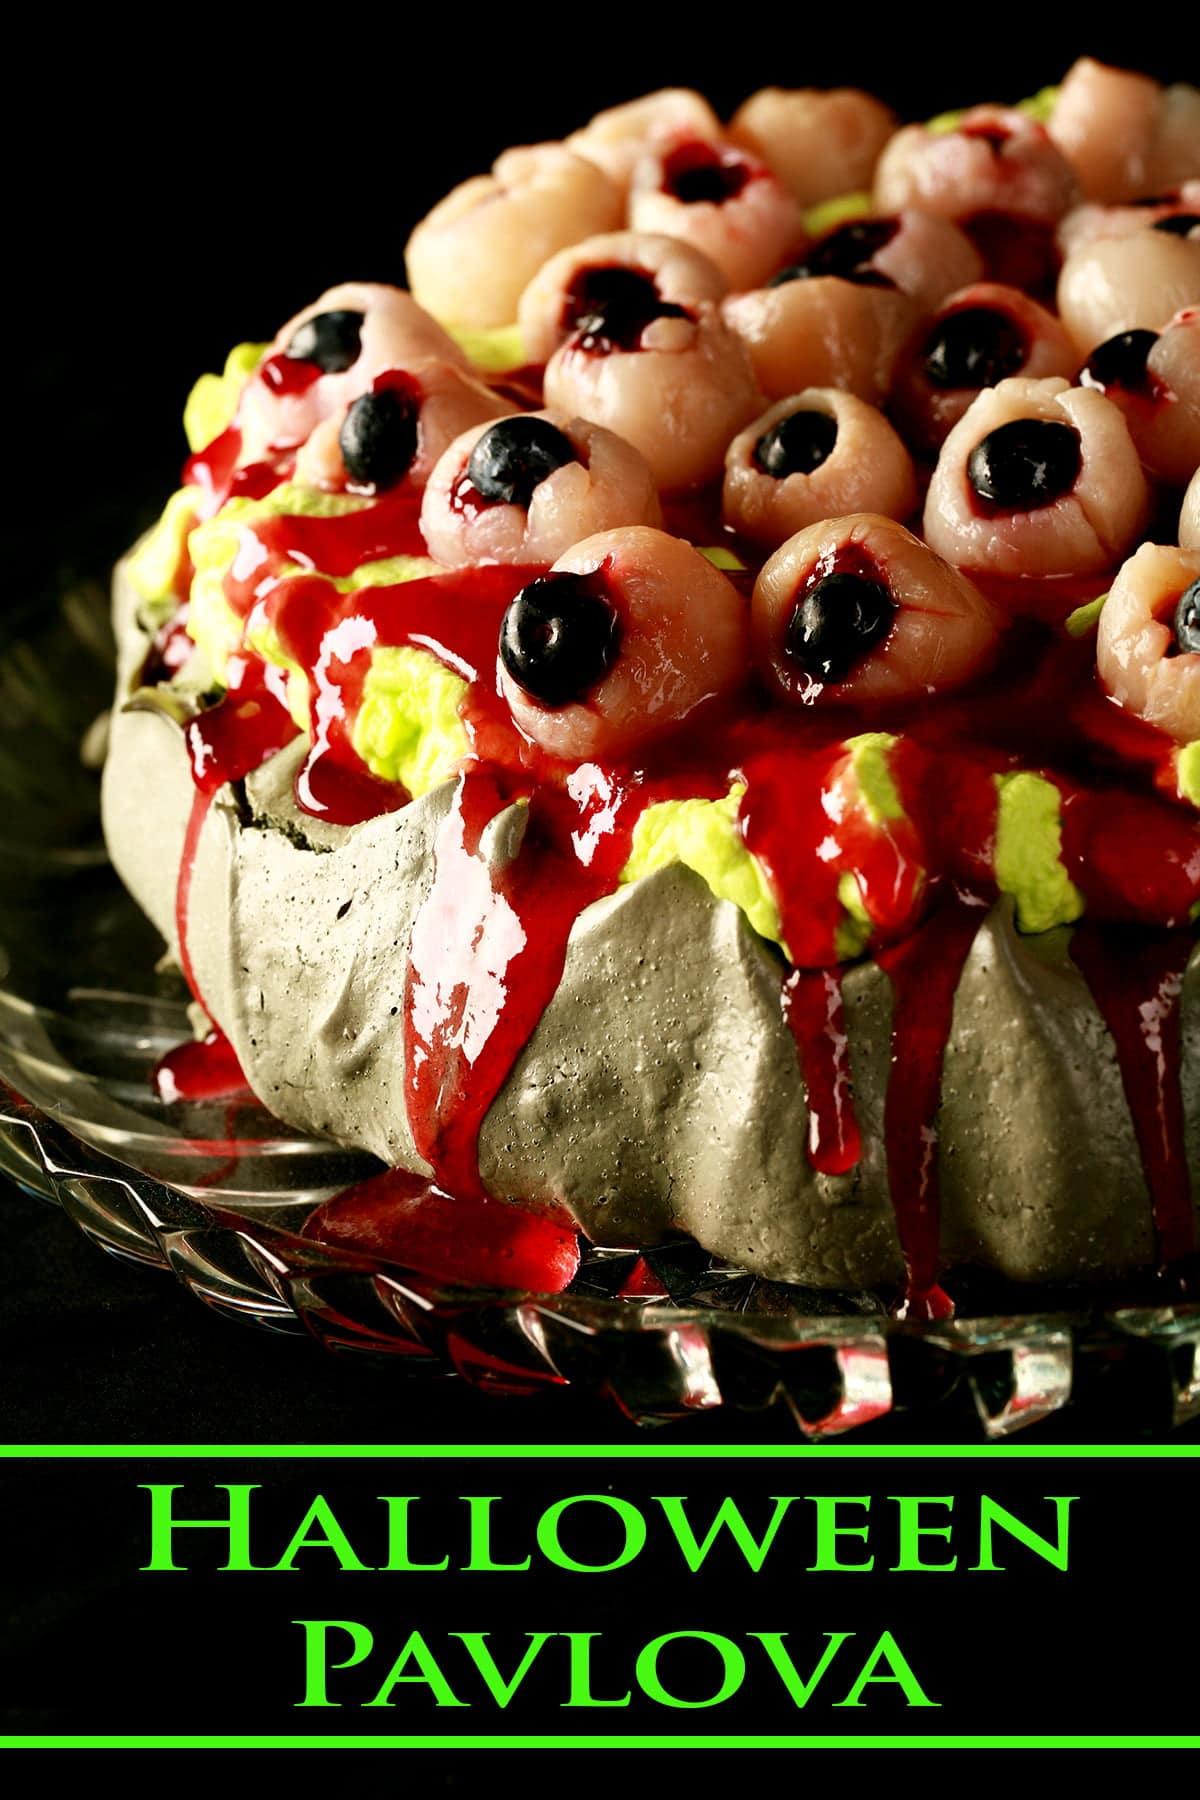 Halloween pavlova topped with lychees eyes.